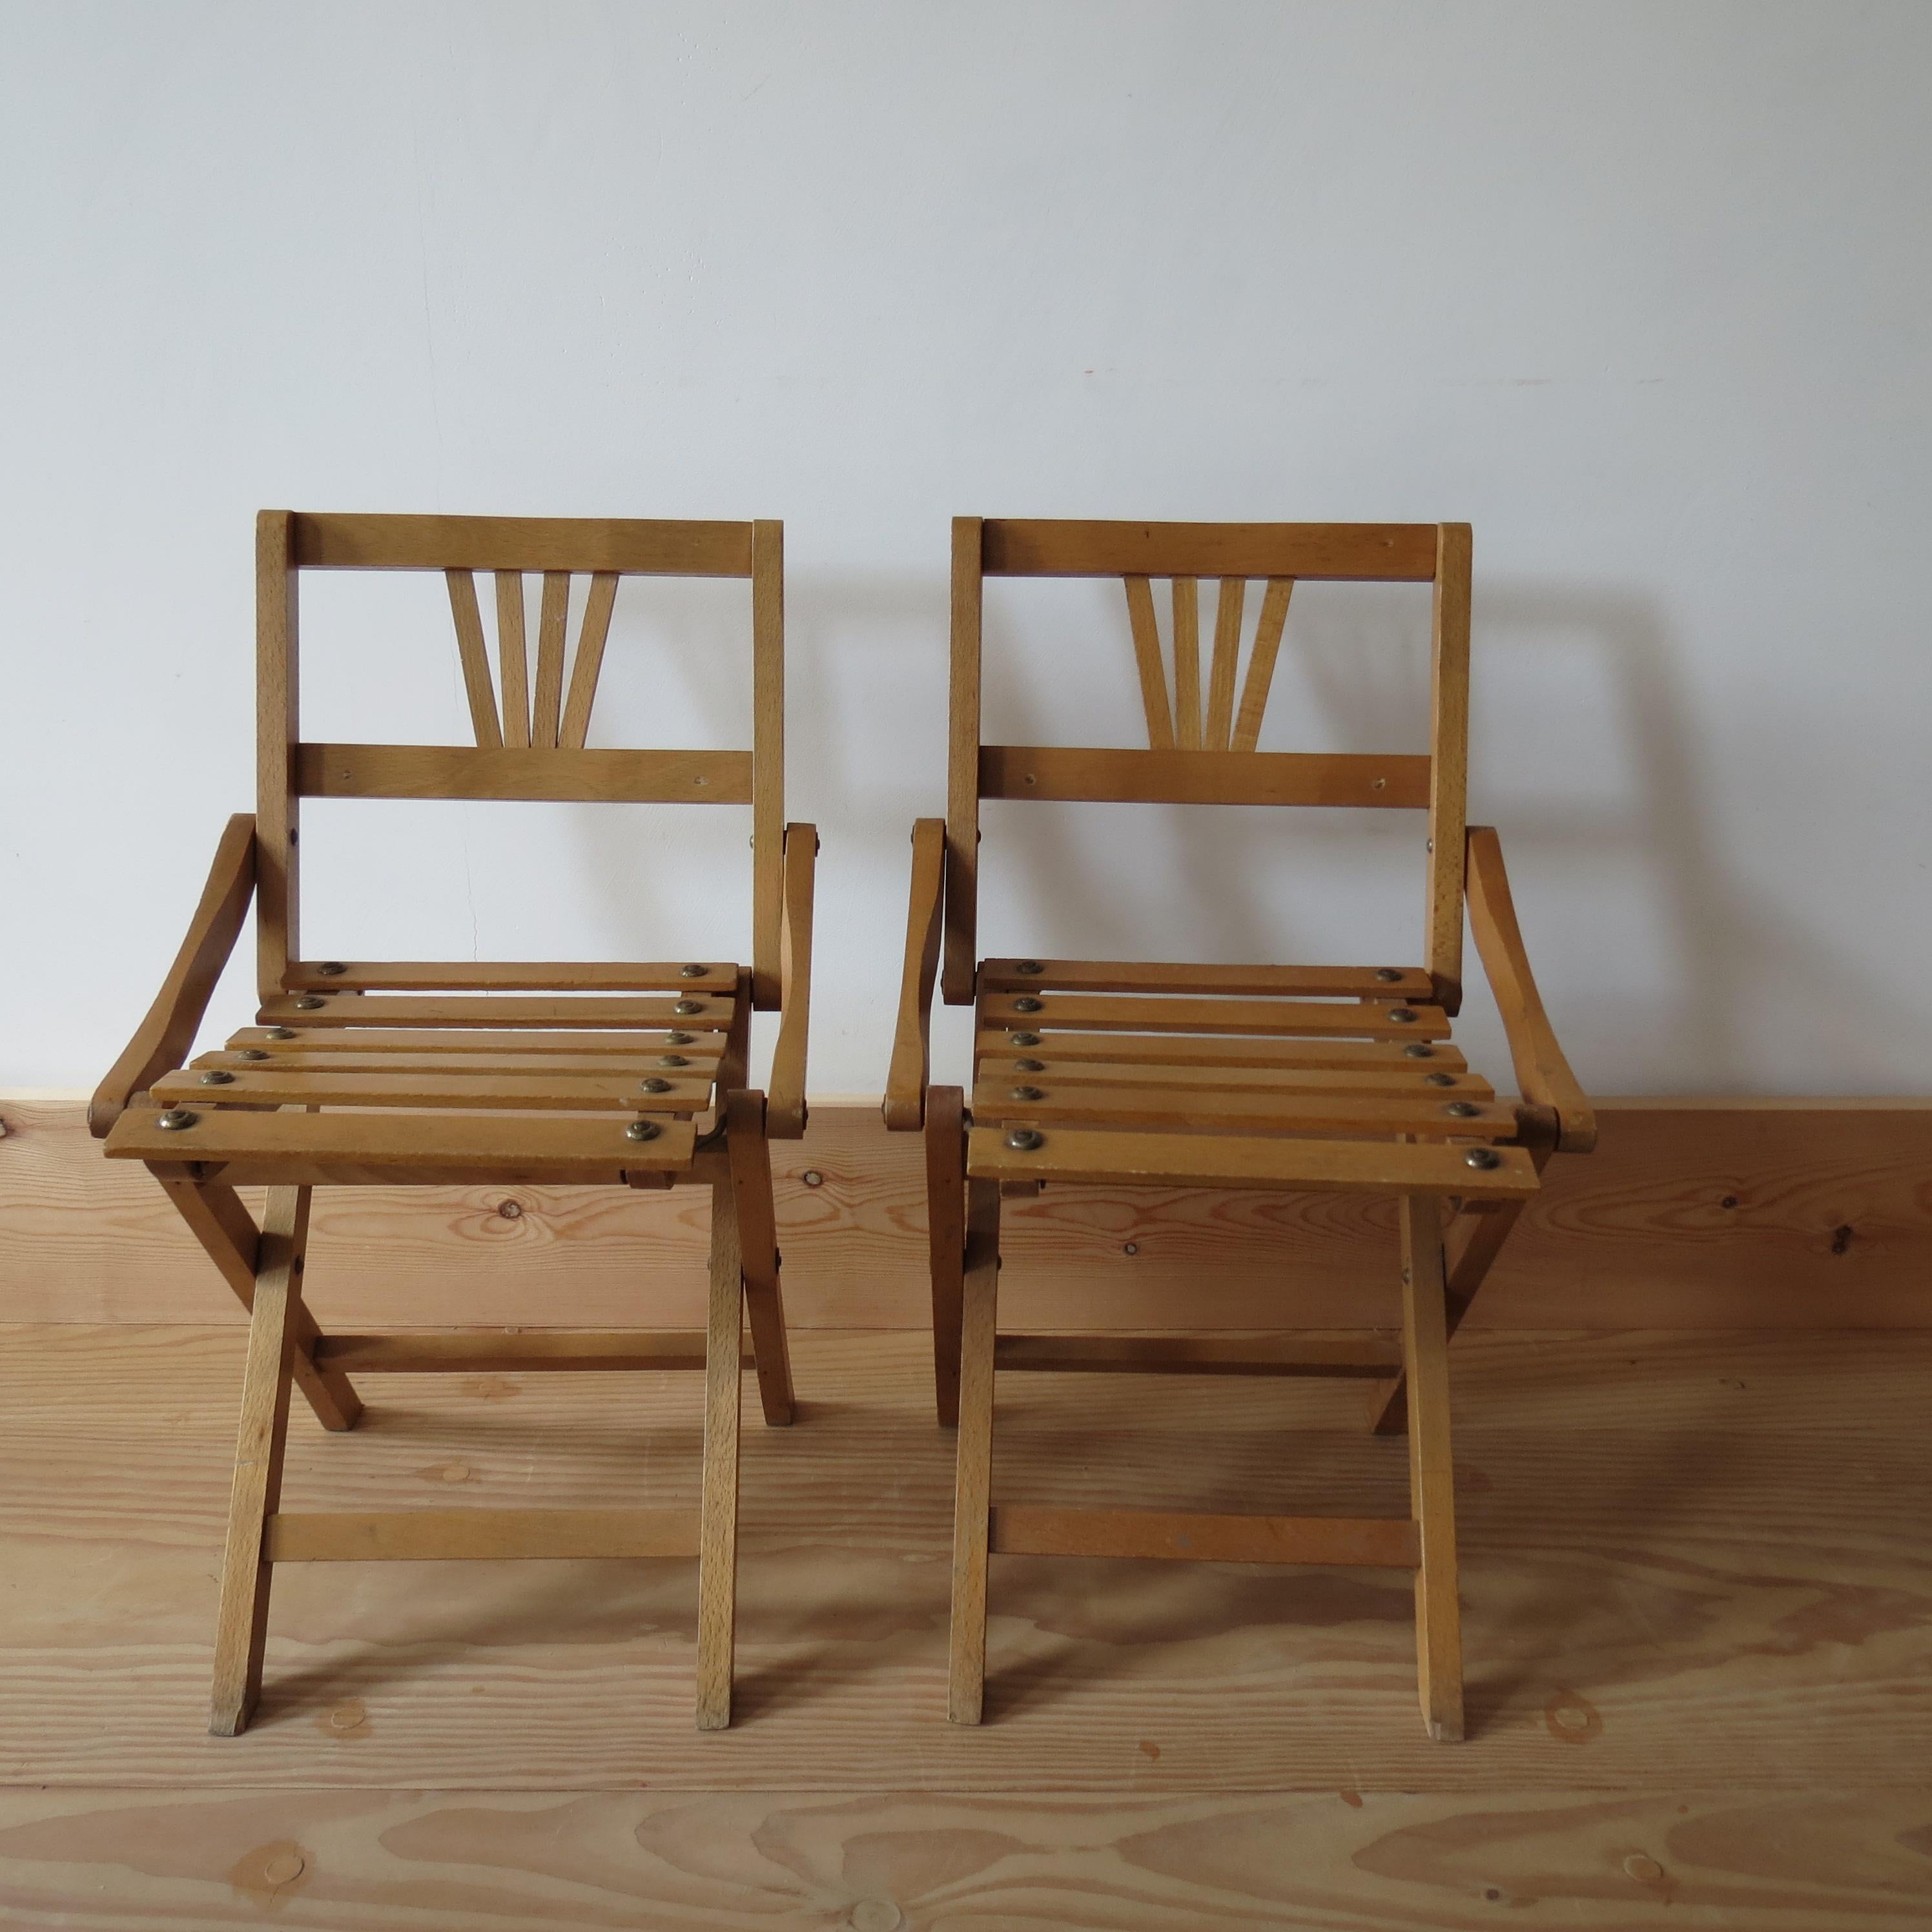 Pair of Czechoslovakia vintage folding child’s chairs 1940s Sfinx Filakova

Pair of well-made folding child’s chairs from Czechoslovakia produced in the 1940s by Sfinx Filakova. Made from solid beech with brass screw detail. The chairs fold easily